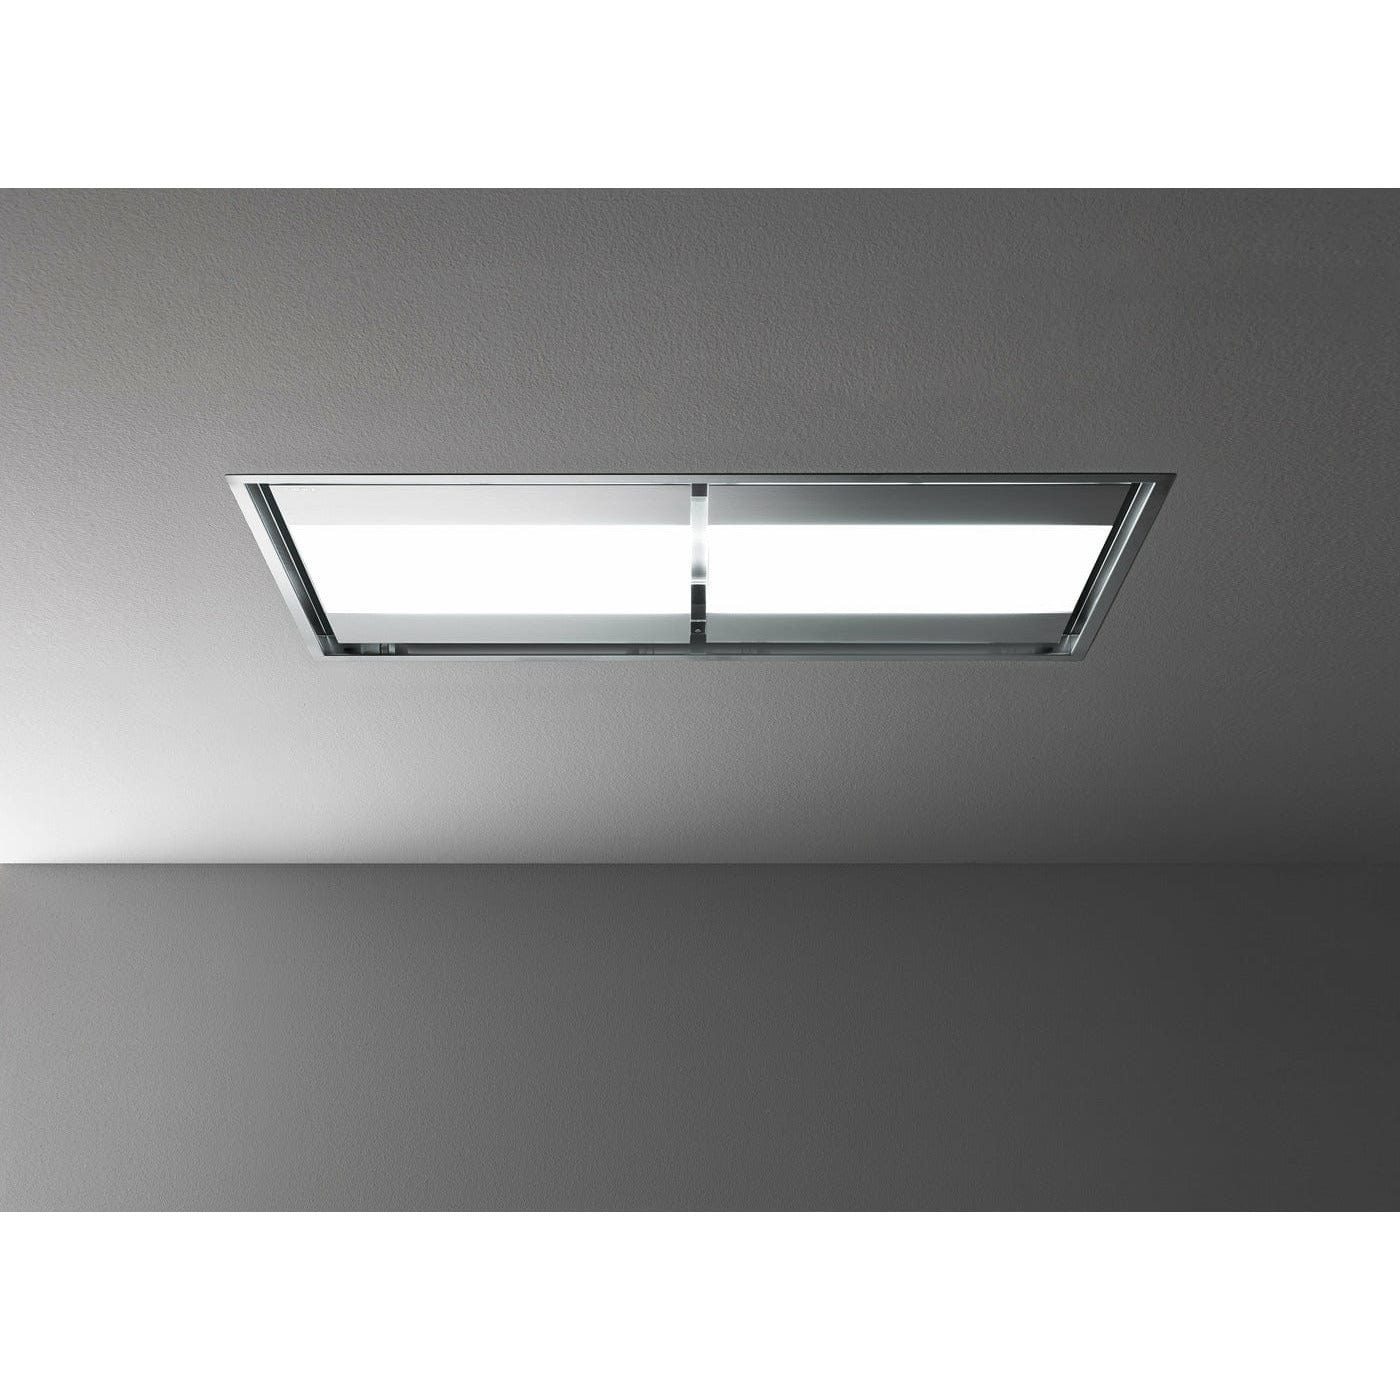 Falmec Nuvola 55" Ceiling Liner Only (Motor Not included) w/ Scotch brite stainless steel (AISI 304) , Tempered glass , Perimeter suction, LED and Remote control - FDNUV54C6SS-R1 Hoods FDNUV54C6SS-R1 Luxury Appliances Direct